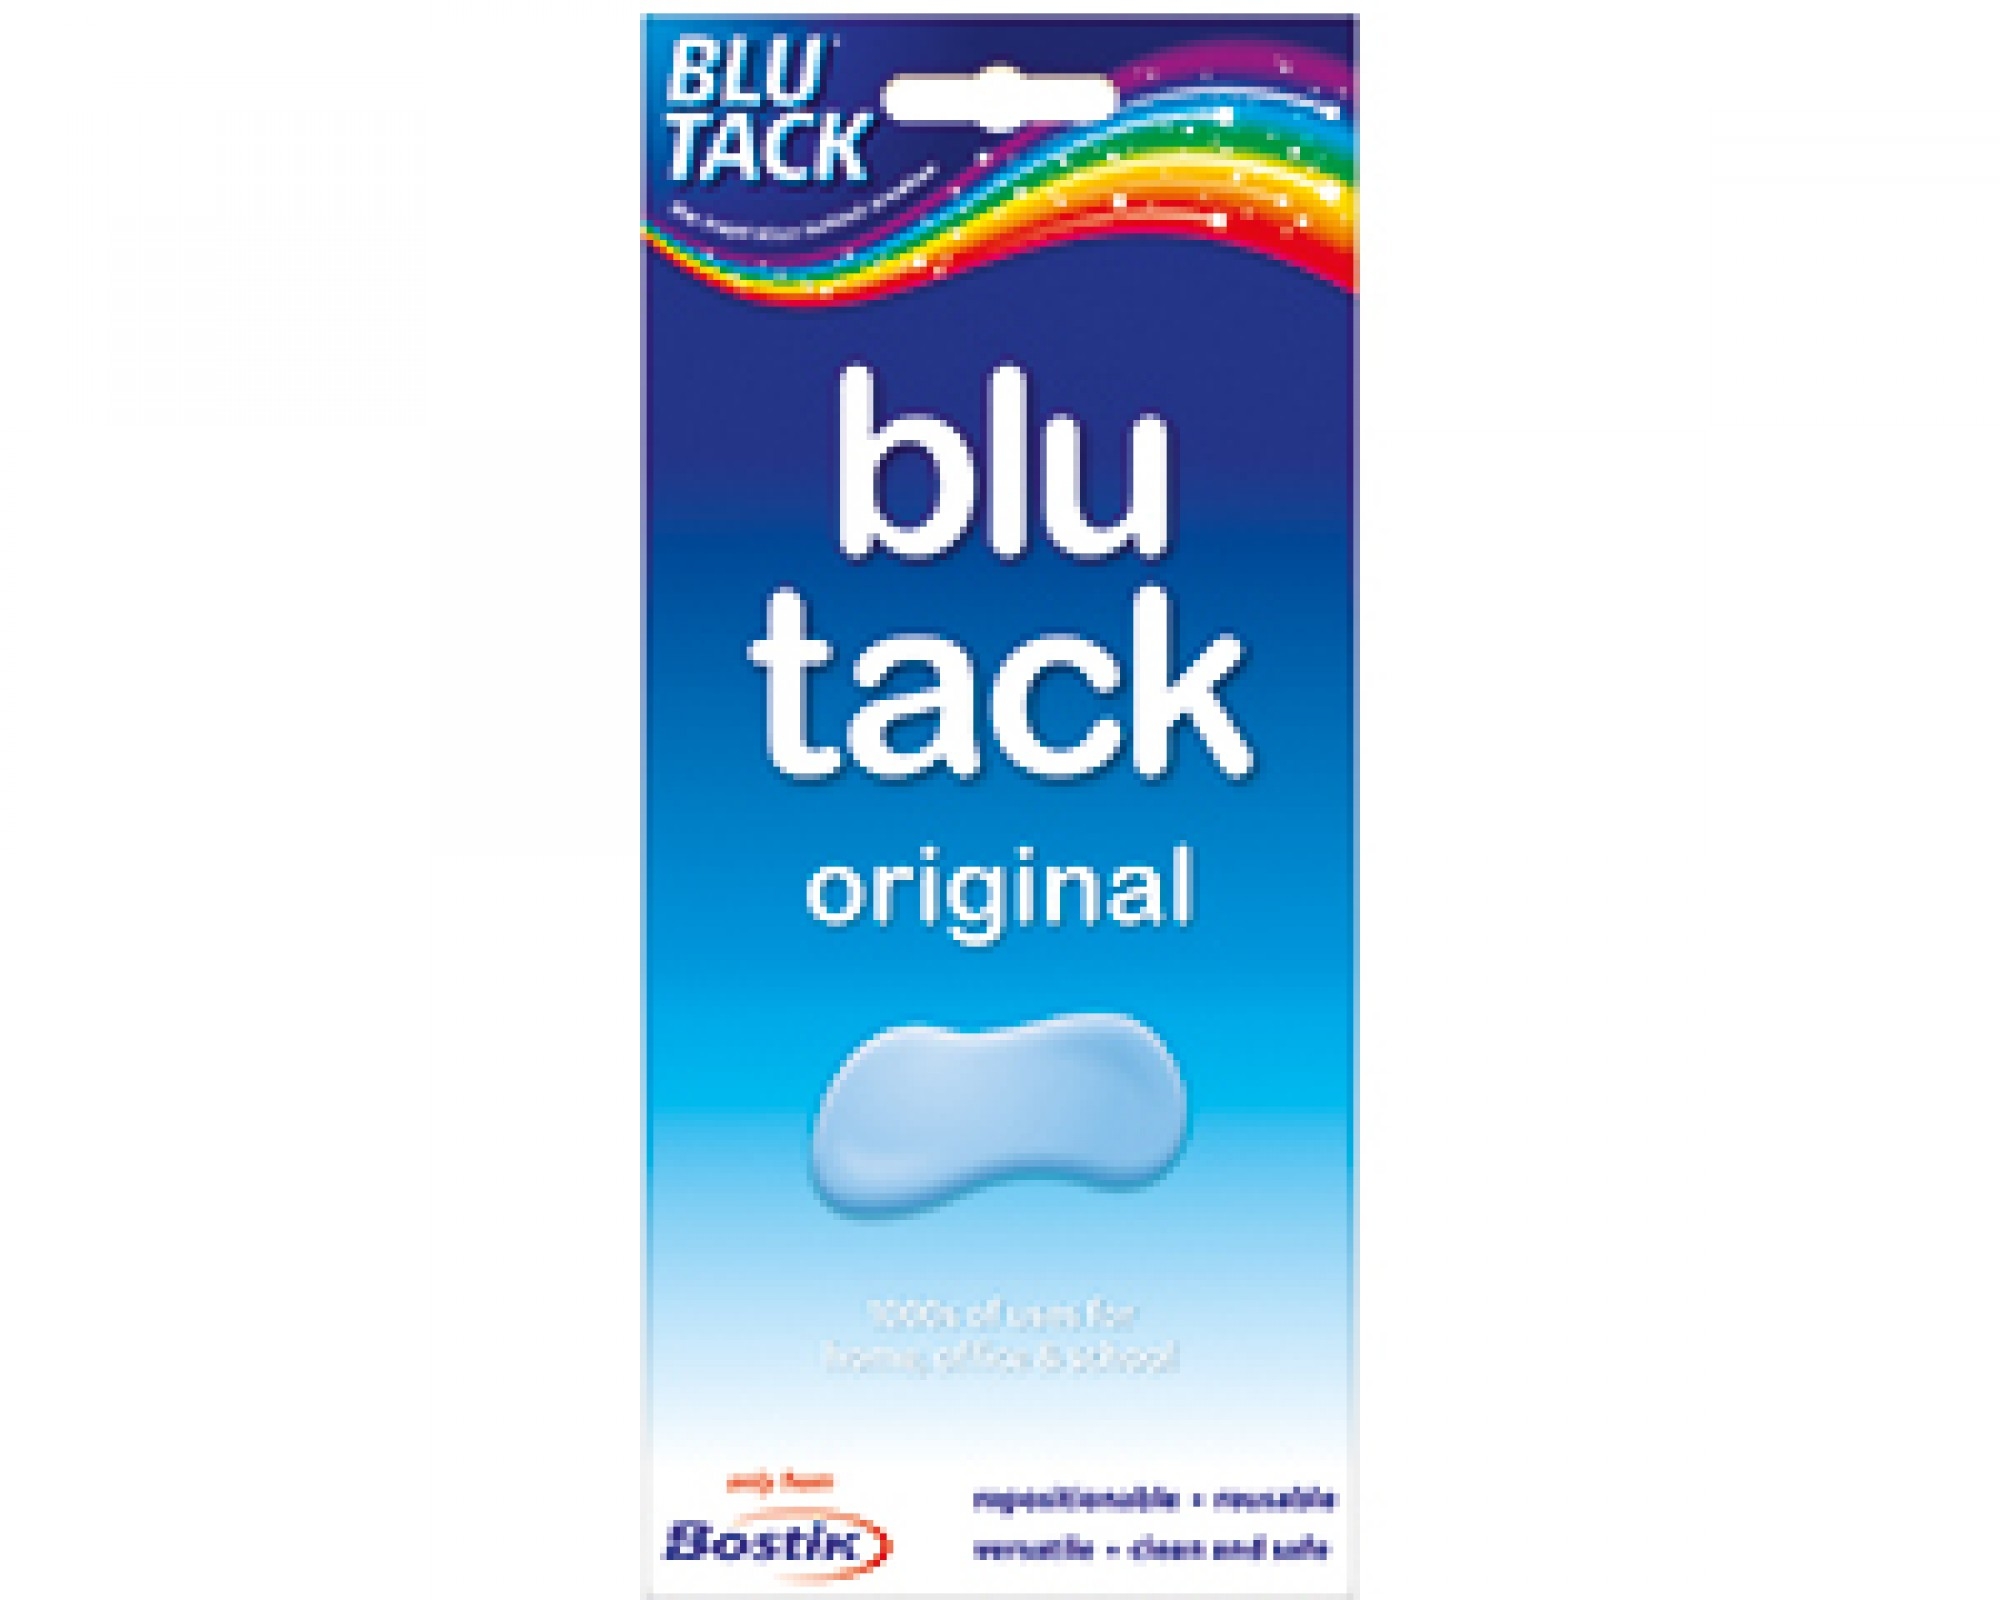 Blu Tack Hair Removal Tips - wide 4